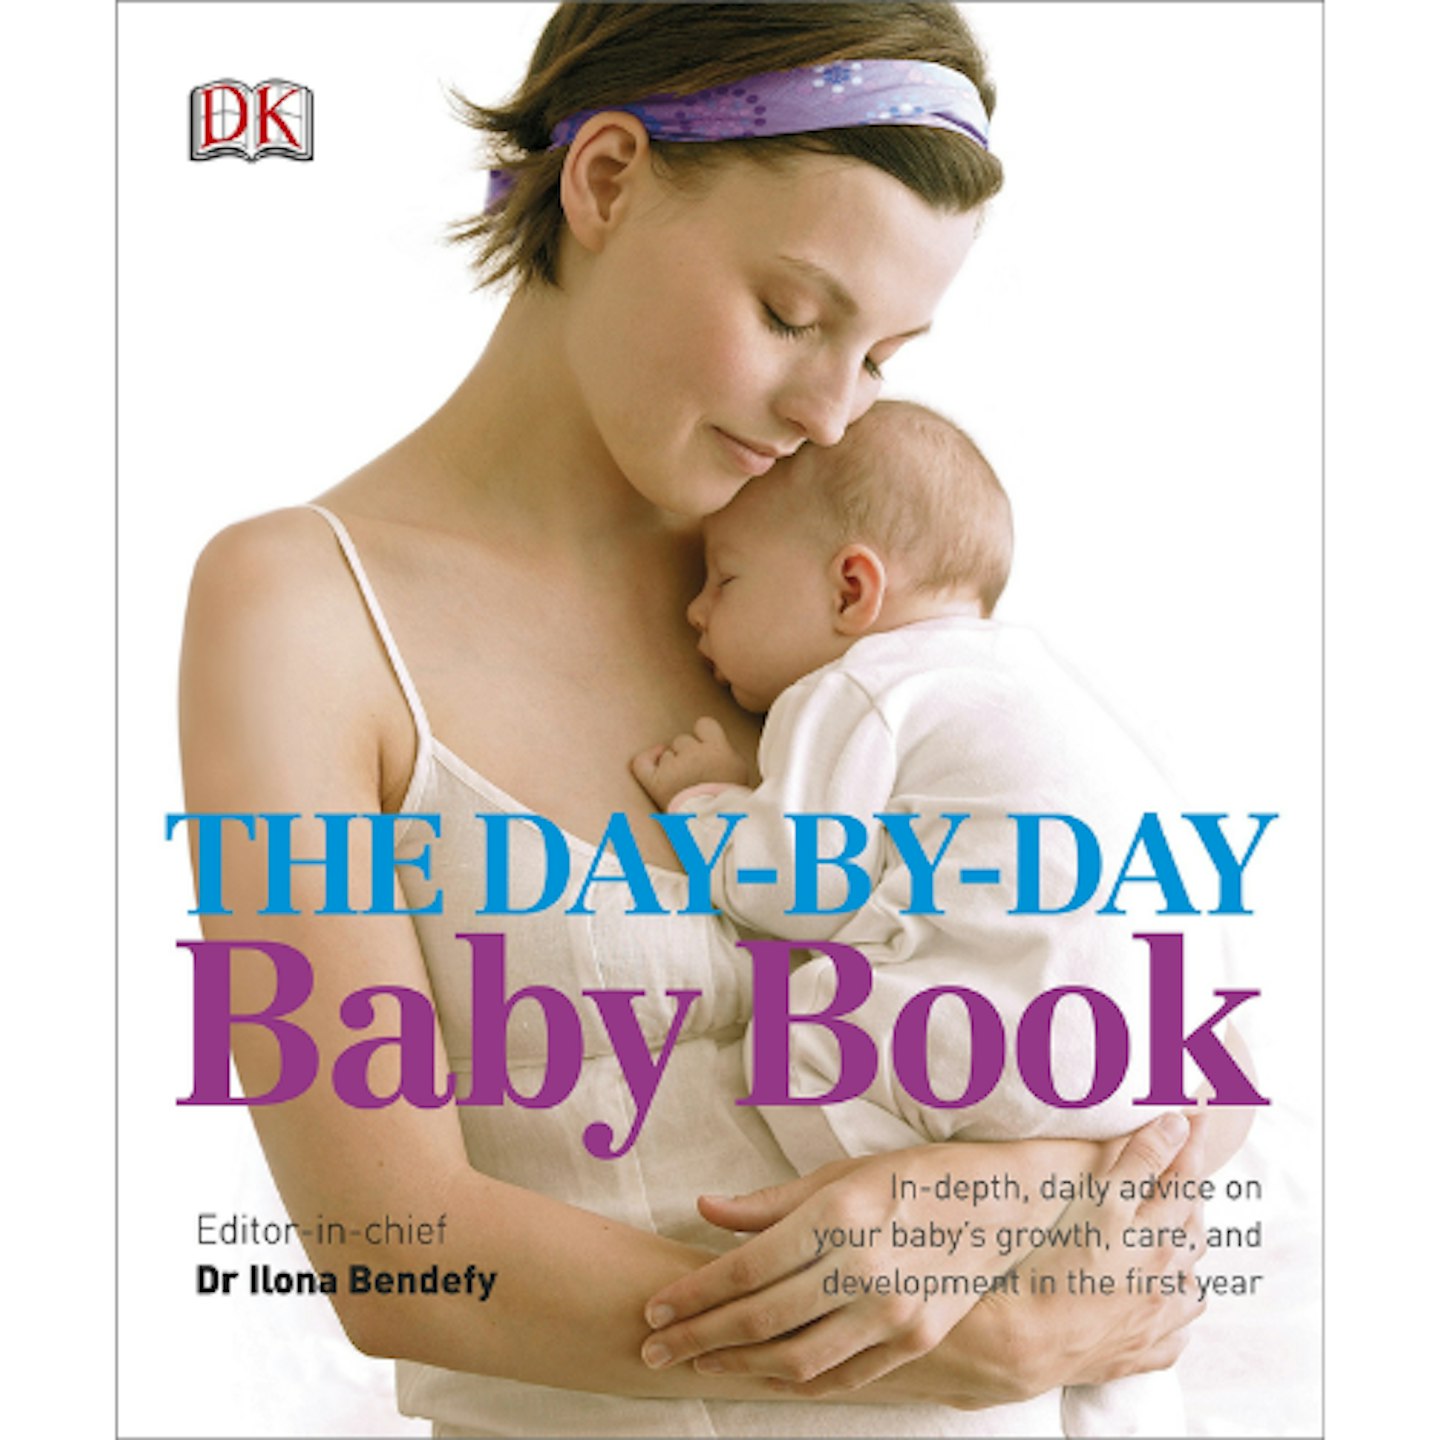 The Day-by-Day Baby Book